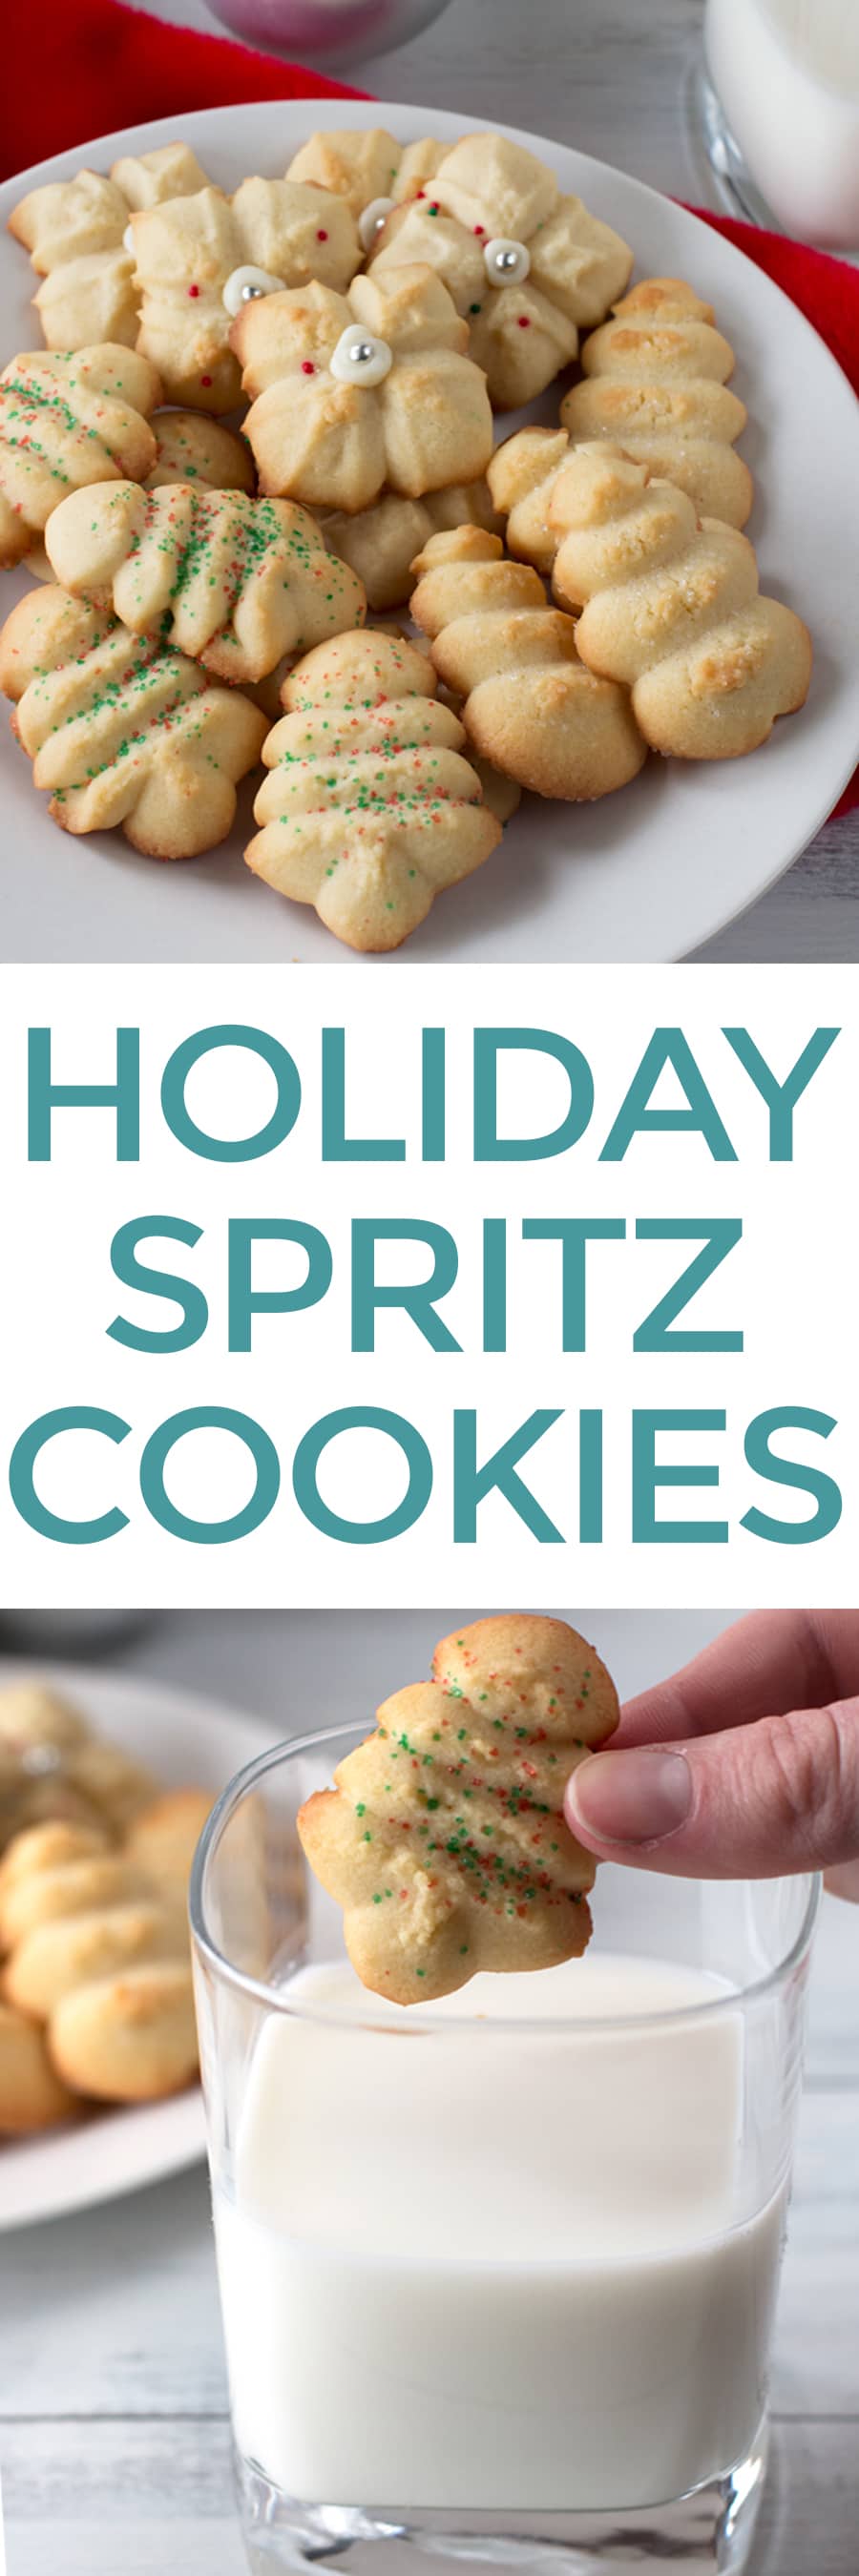 The Great Food Blogger Cookie Swap: Holiday Spritz Cookies | Cake 'n Knife